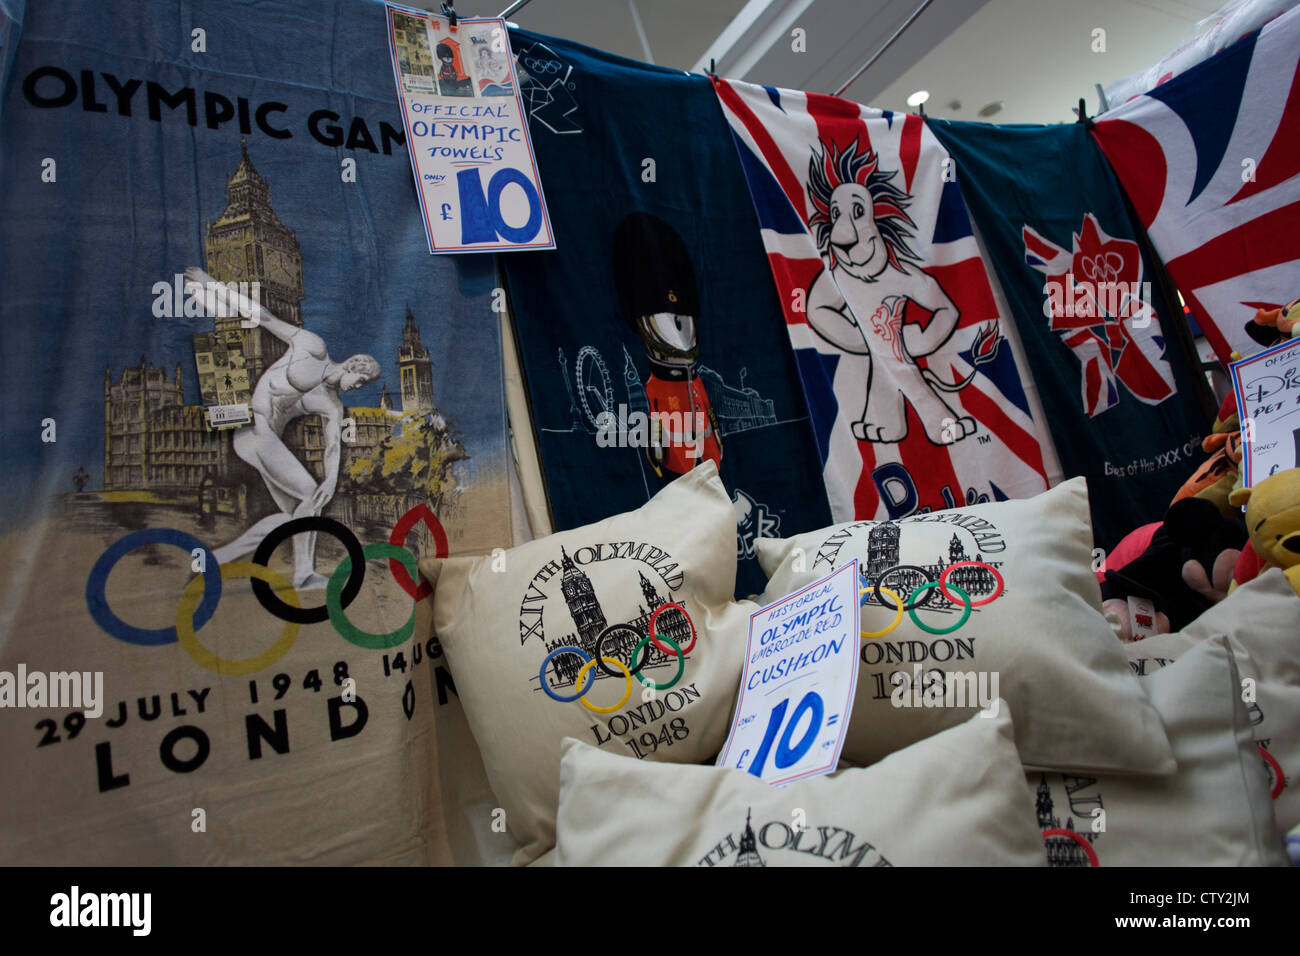 In the local community Stratford Centre shopping mall in East London, we see official Olympic merchandising on sale during the London 2012 Olympics, the 30th Olympiad. A few hundred metres from the giant Westfield plaza complex that acts as a gateway to the main Olympic arenas, this market outdates the newer development where similar souvenirs can be bought for up to twice the prices offered by the stall holder. Cashions are £10 (Pounds) and duvet covers (bedding) are £20. Stock Photo